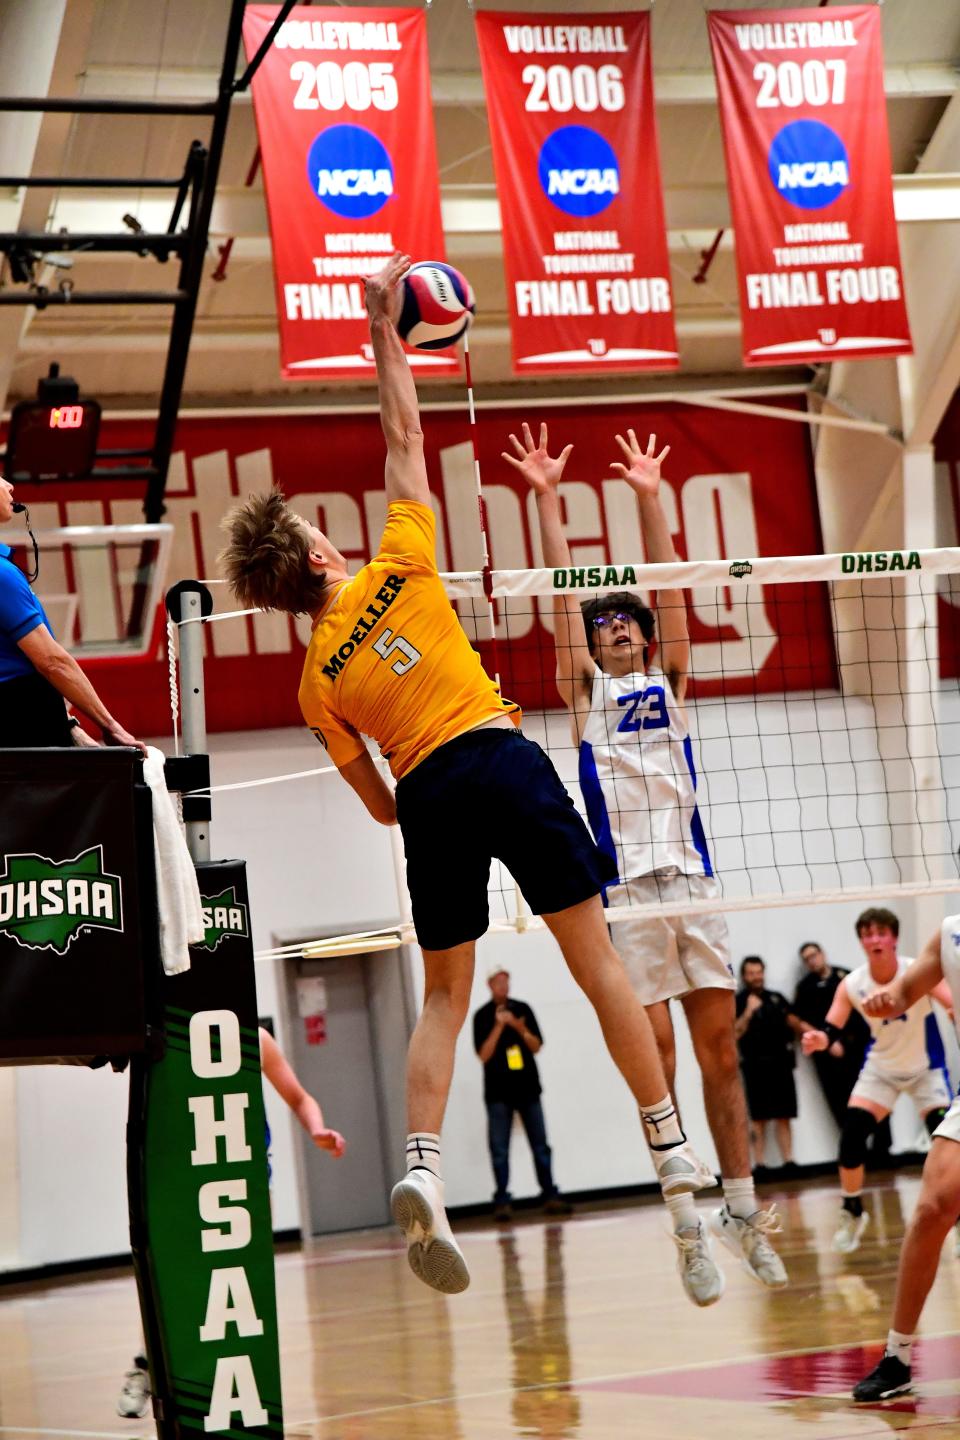 Brody Threm (5) keeps the volley going on what would be the final point scored by Moeller as they capture the state crown at the Inaugural OHSAA Division I Boys Volleyball State Championship, May 28, 2023.